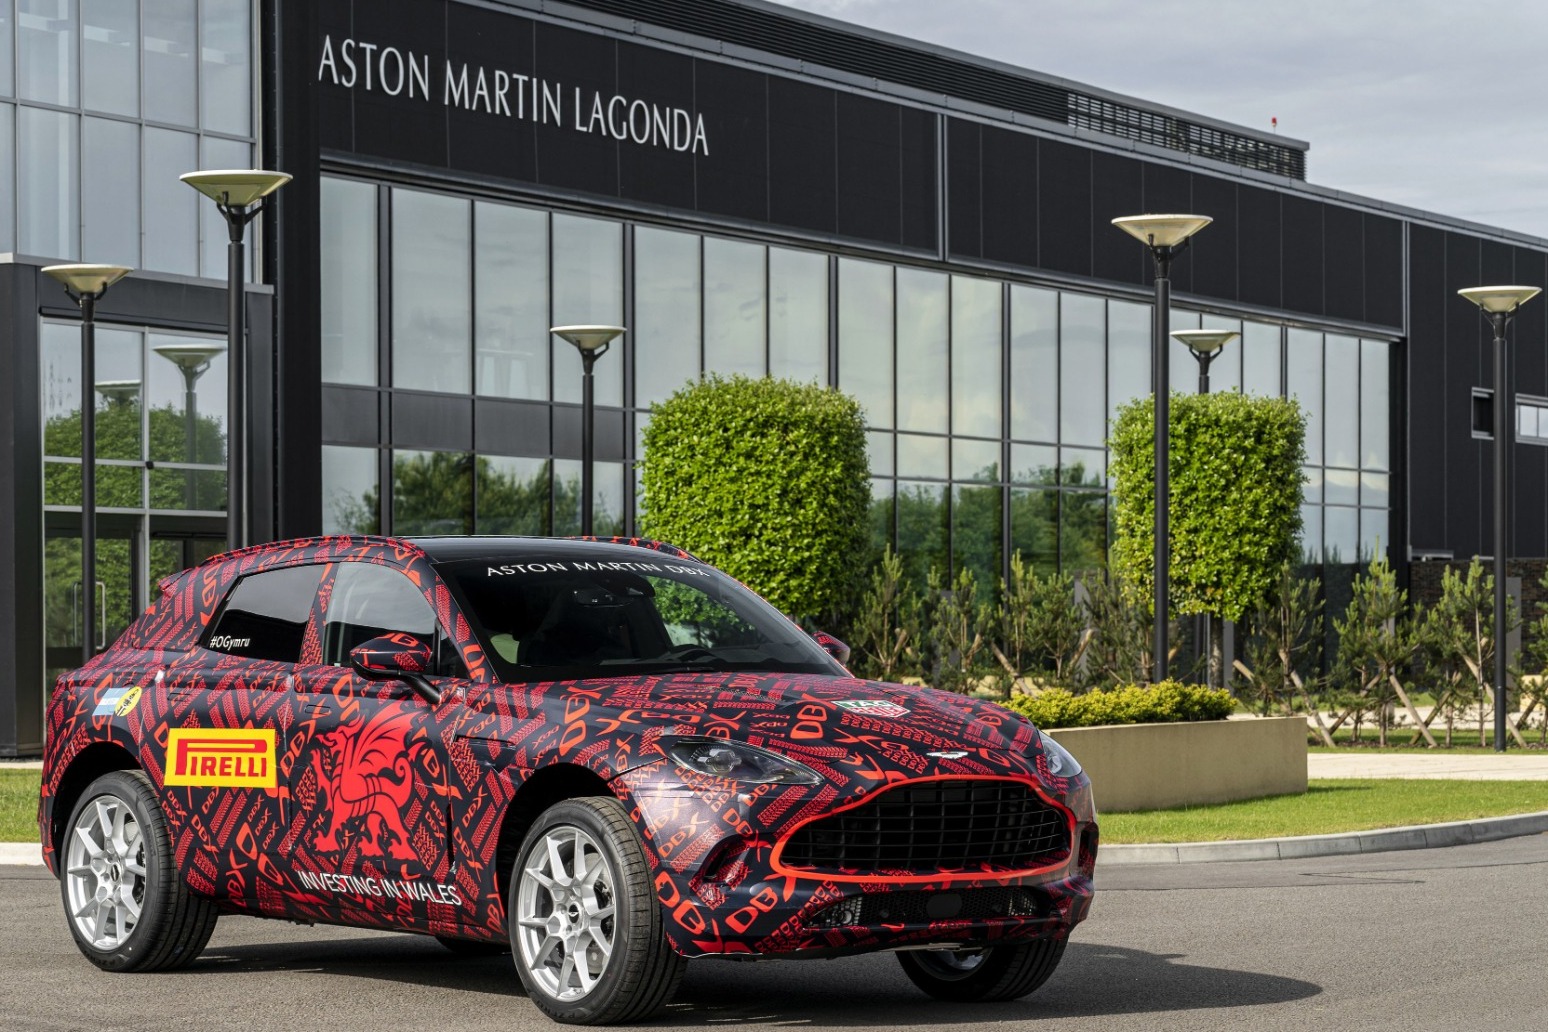 Aston Martin announces ambitious sustainability strategy to be net zero by 2030